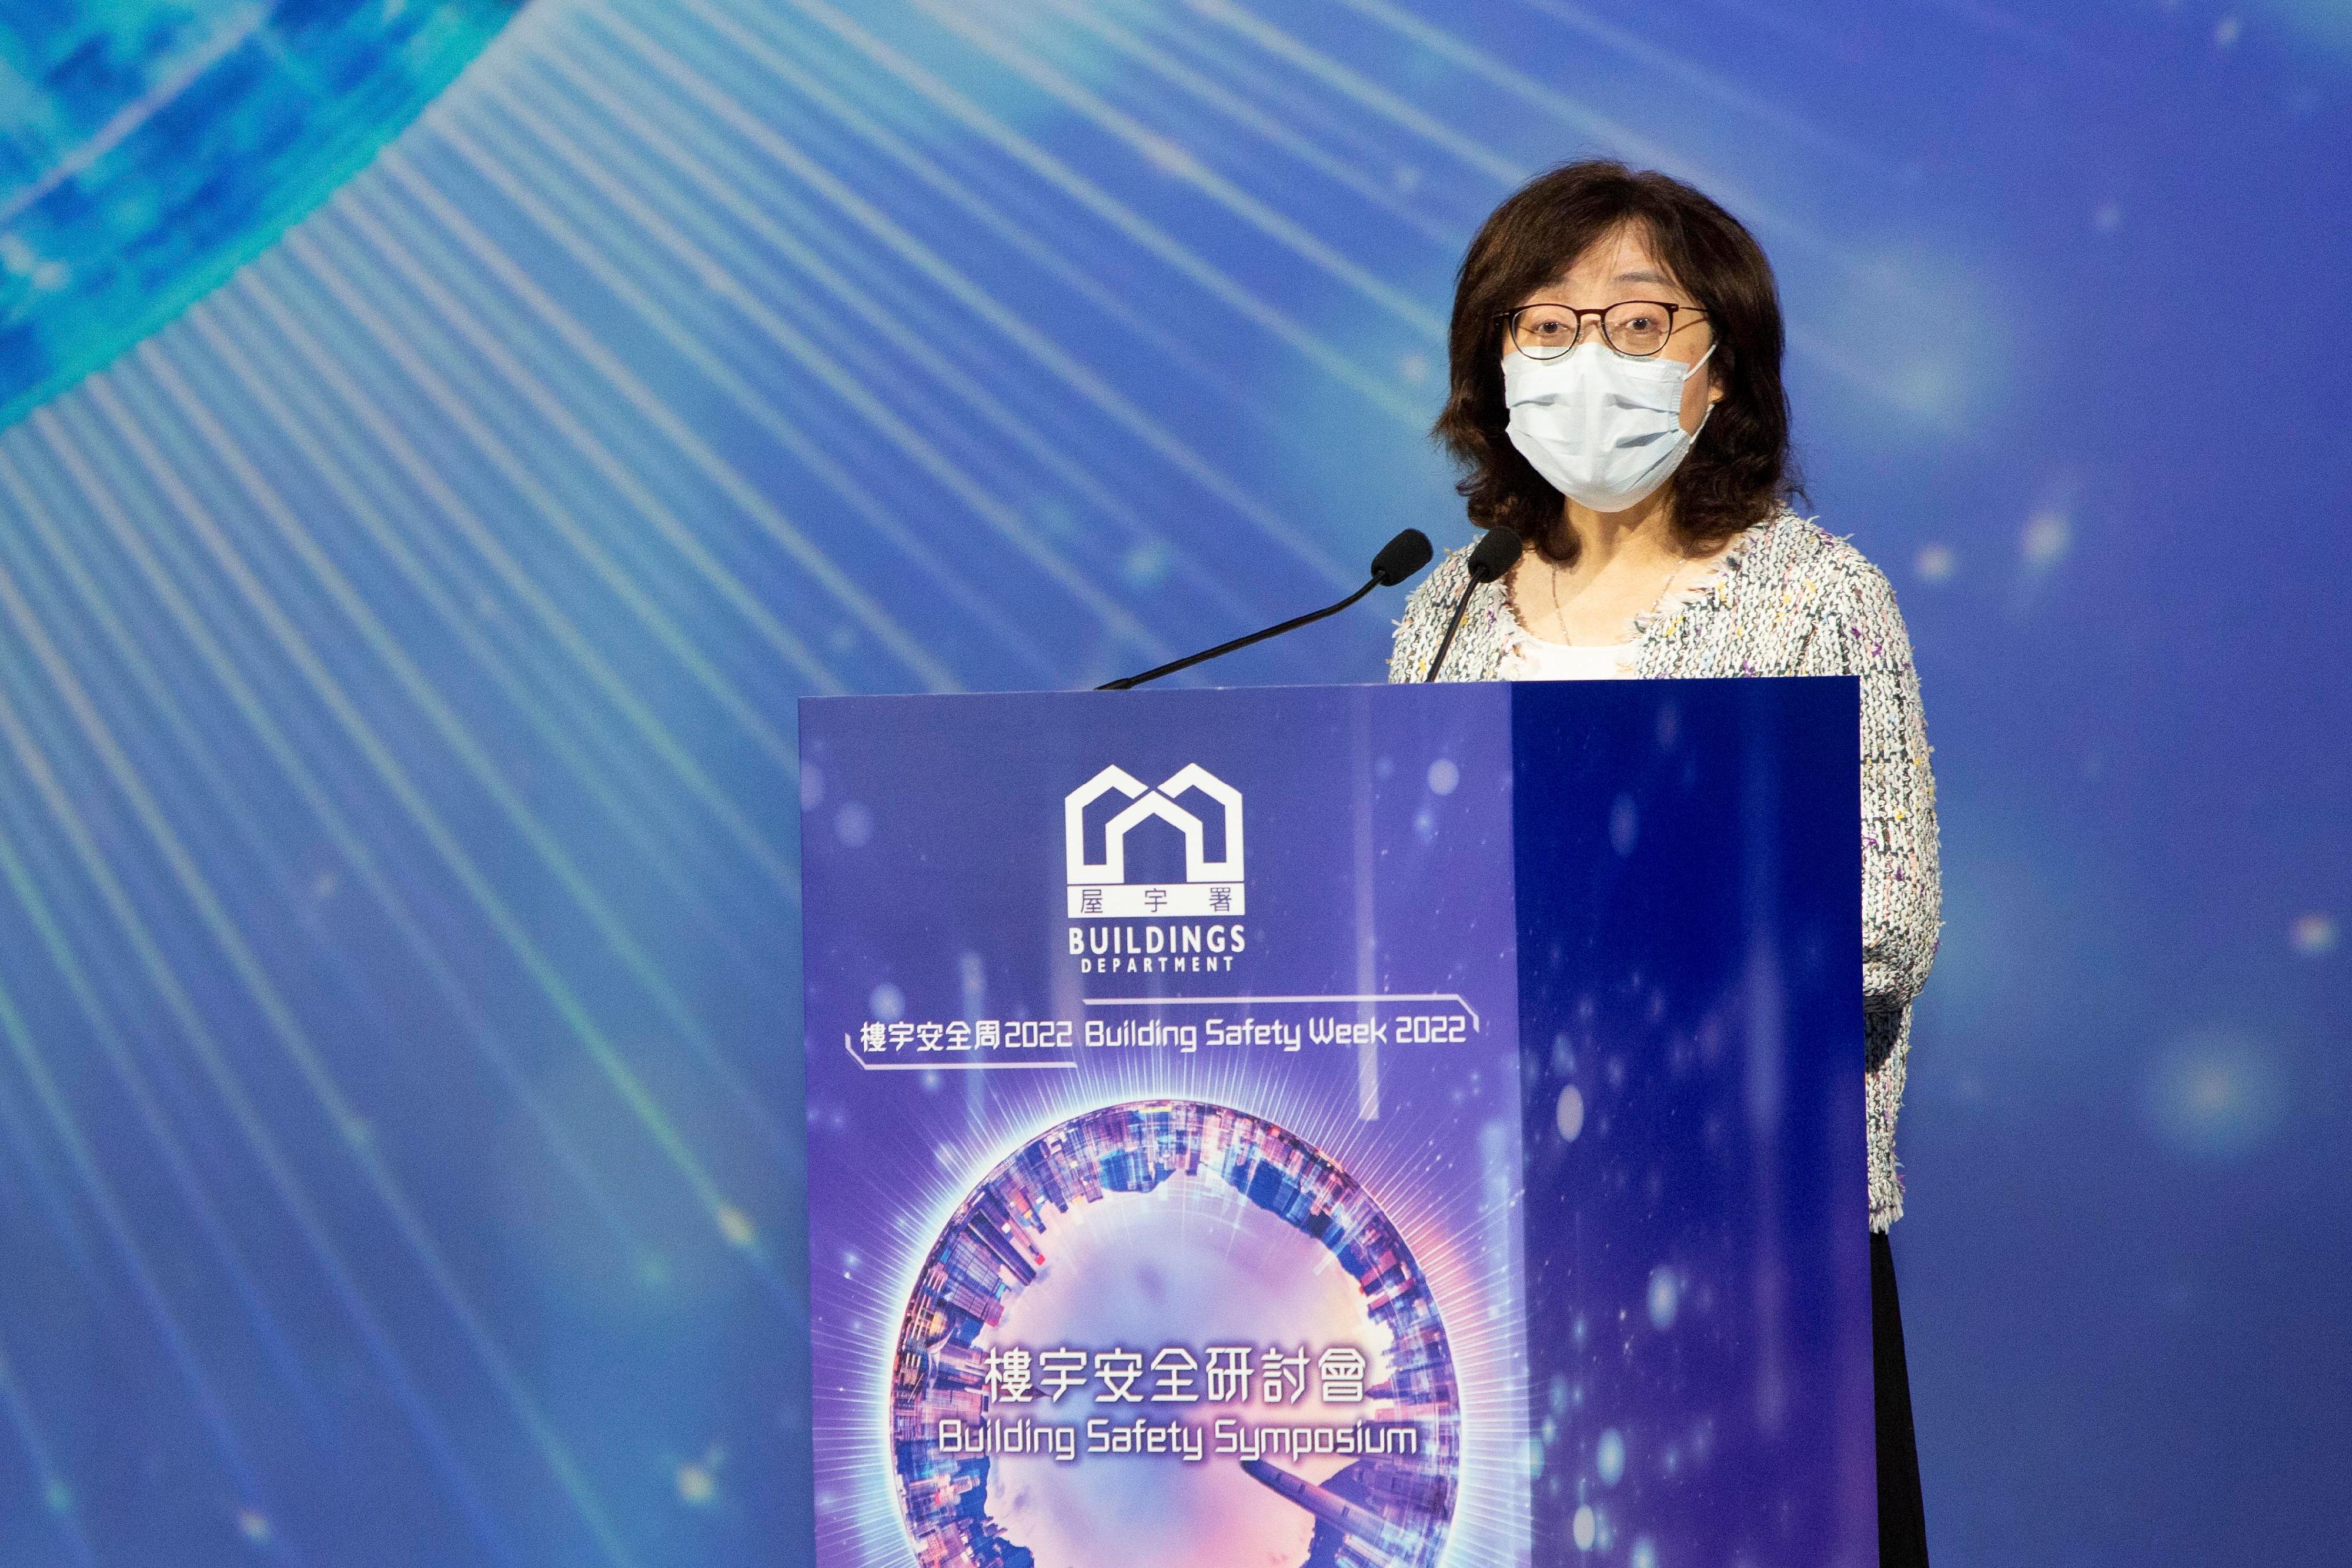 The Buildings Department held the closing event of Building Safety Week 2022, the Building Safety Symposium, at the Xiqu Centre today (October 28). Building professionals, members of the building management sector, government officials and academics were invited to share experiences and exchange views on the topic of "Innovation and Technologies for Building Safety". Photo shows the Secretary for Development, Ms Bernadette Linn, speaking at the symposium.